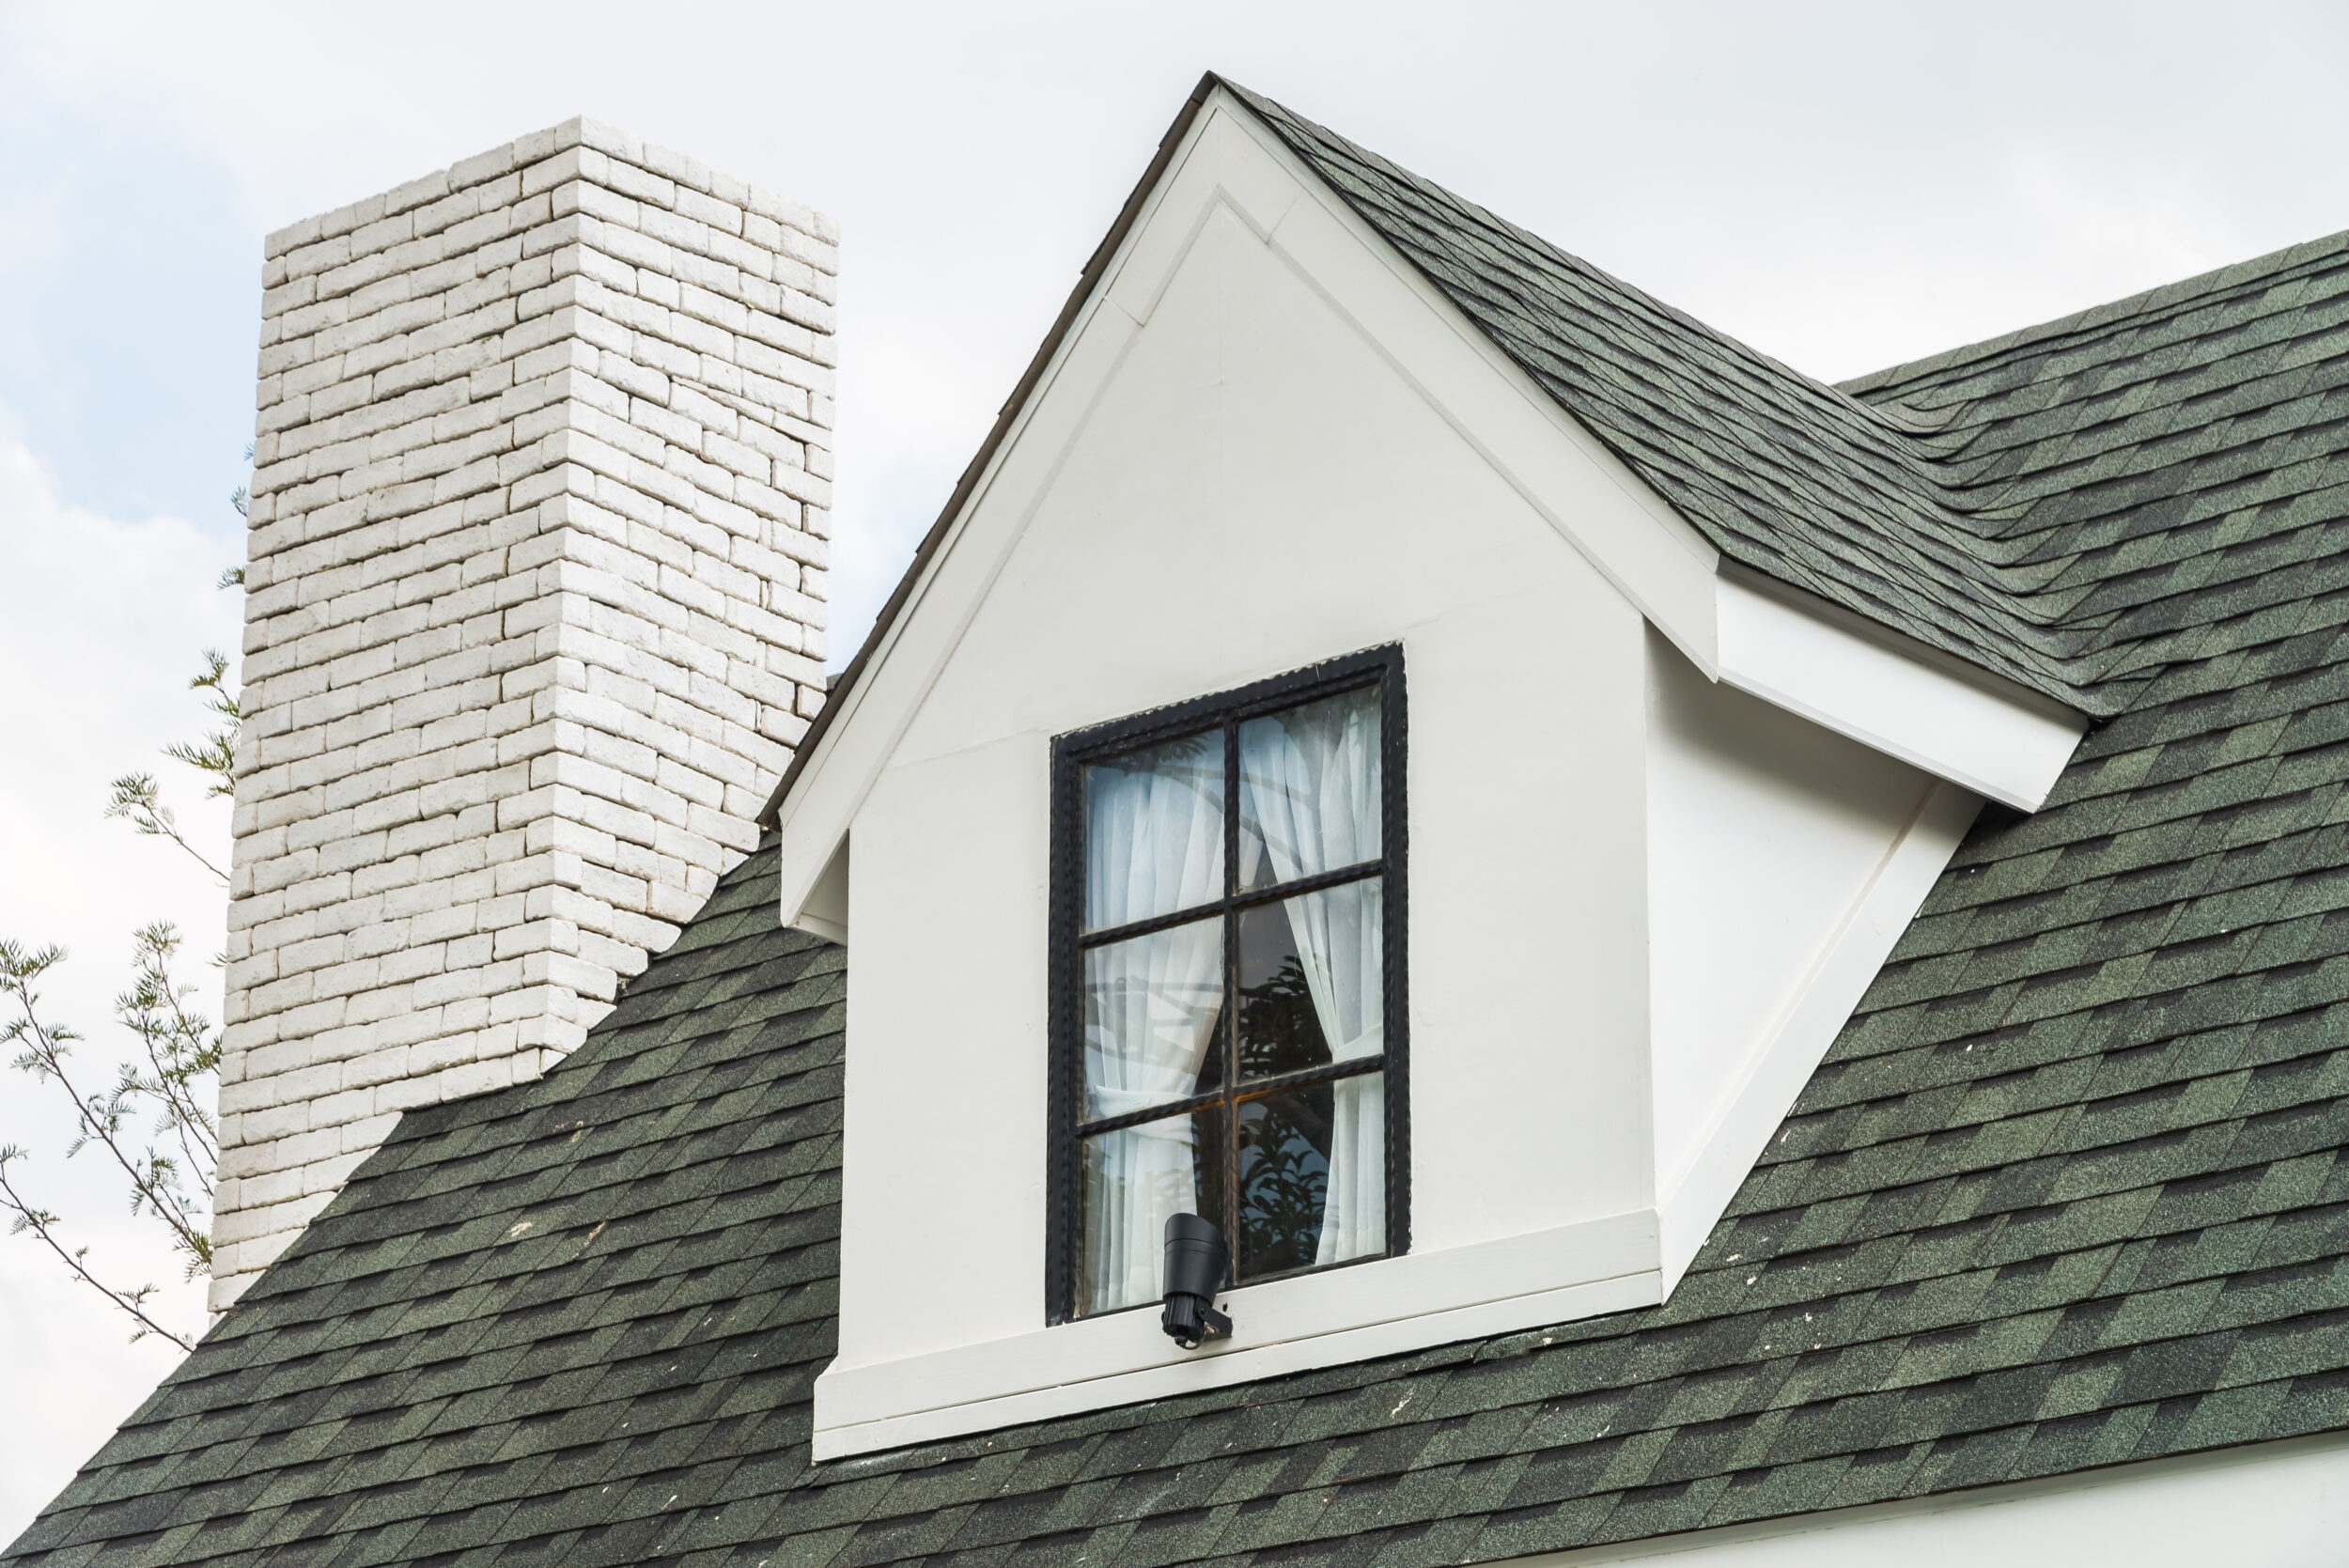 Can insurance pay for chimney when replacing roof?